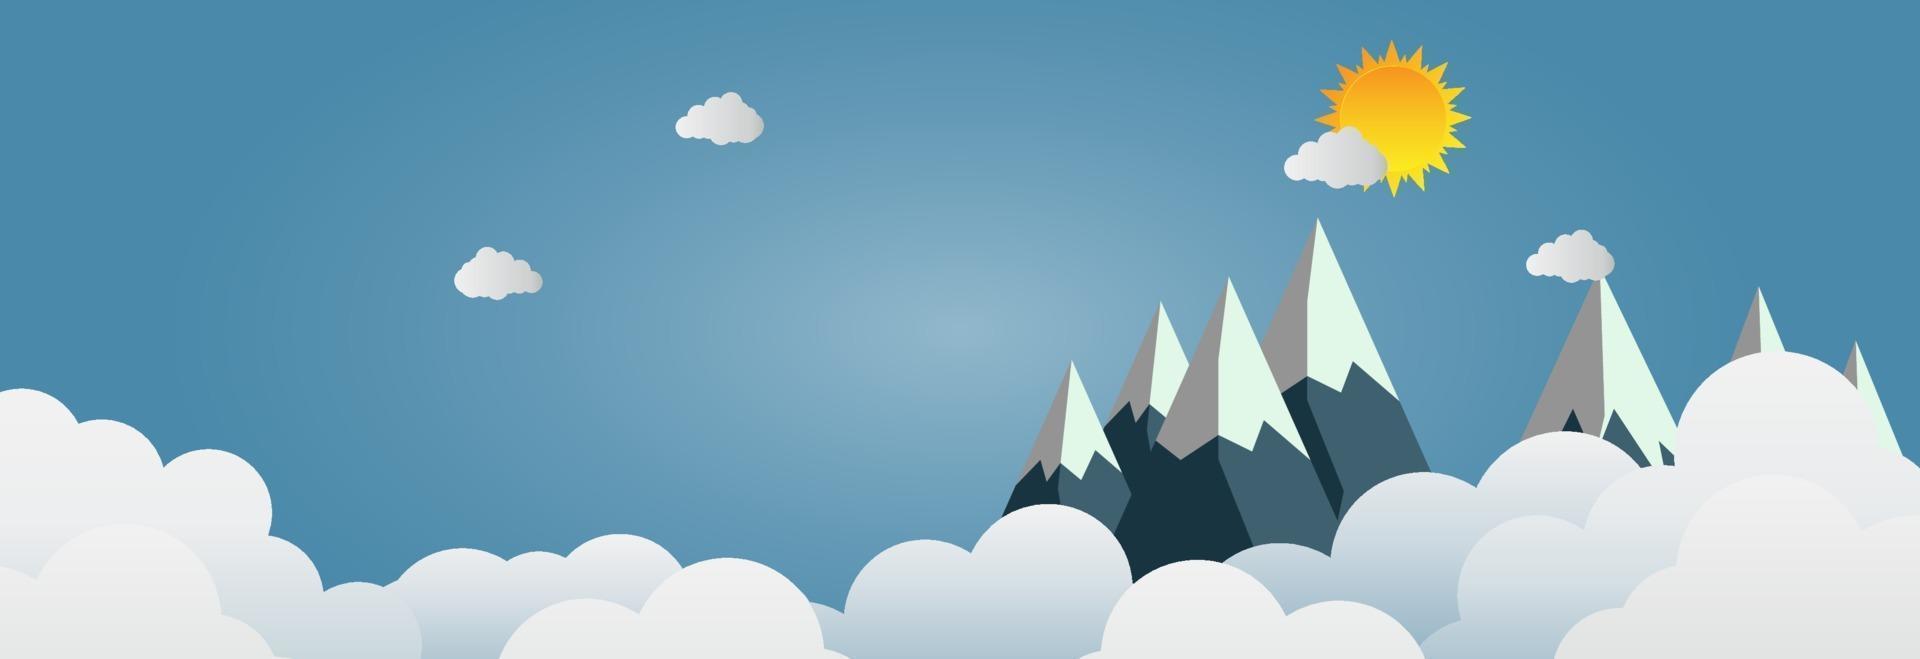 Mountains with beautiful sunset over the clouds. Paper art vector illustration